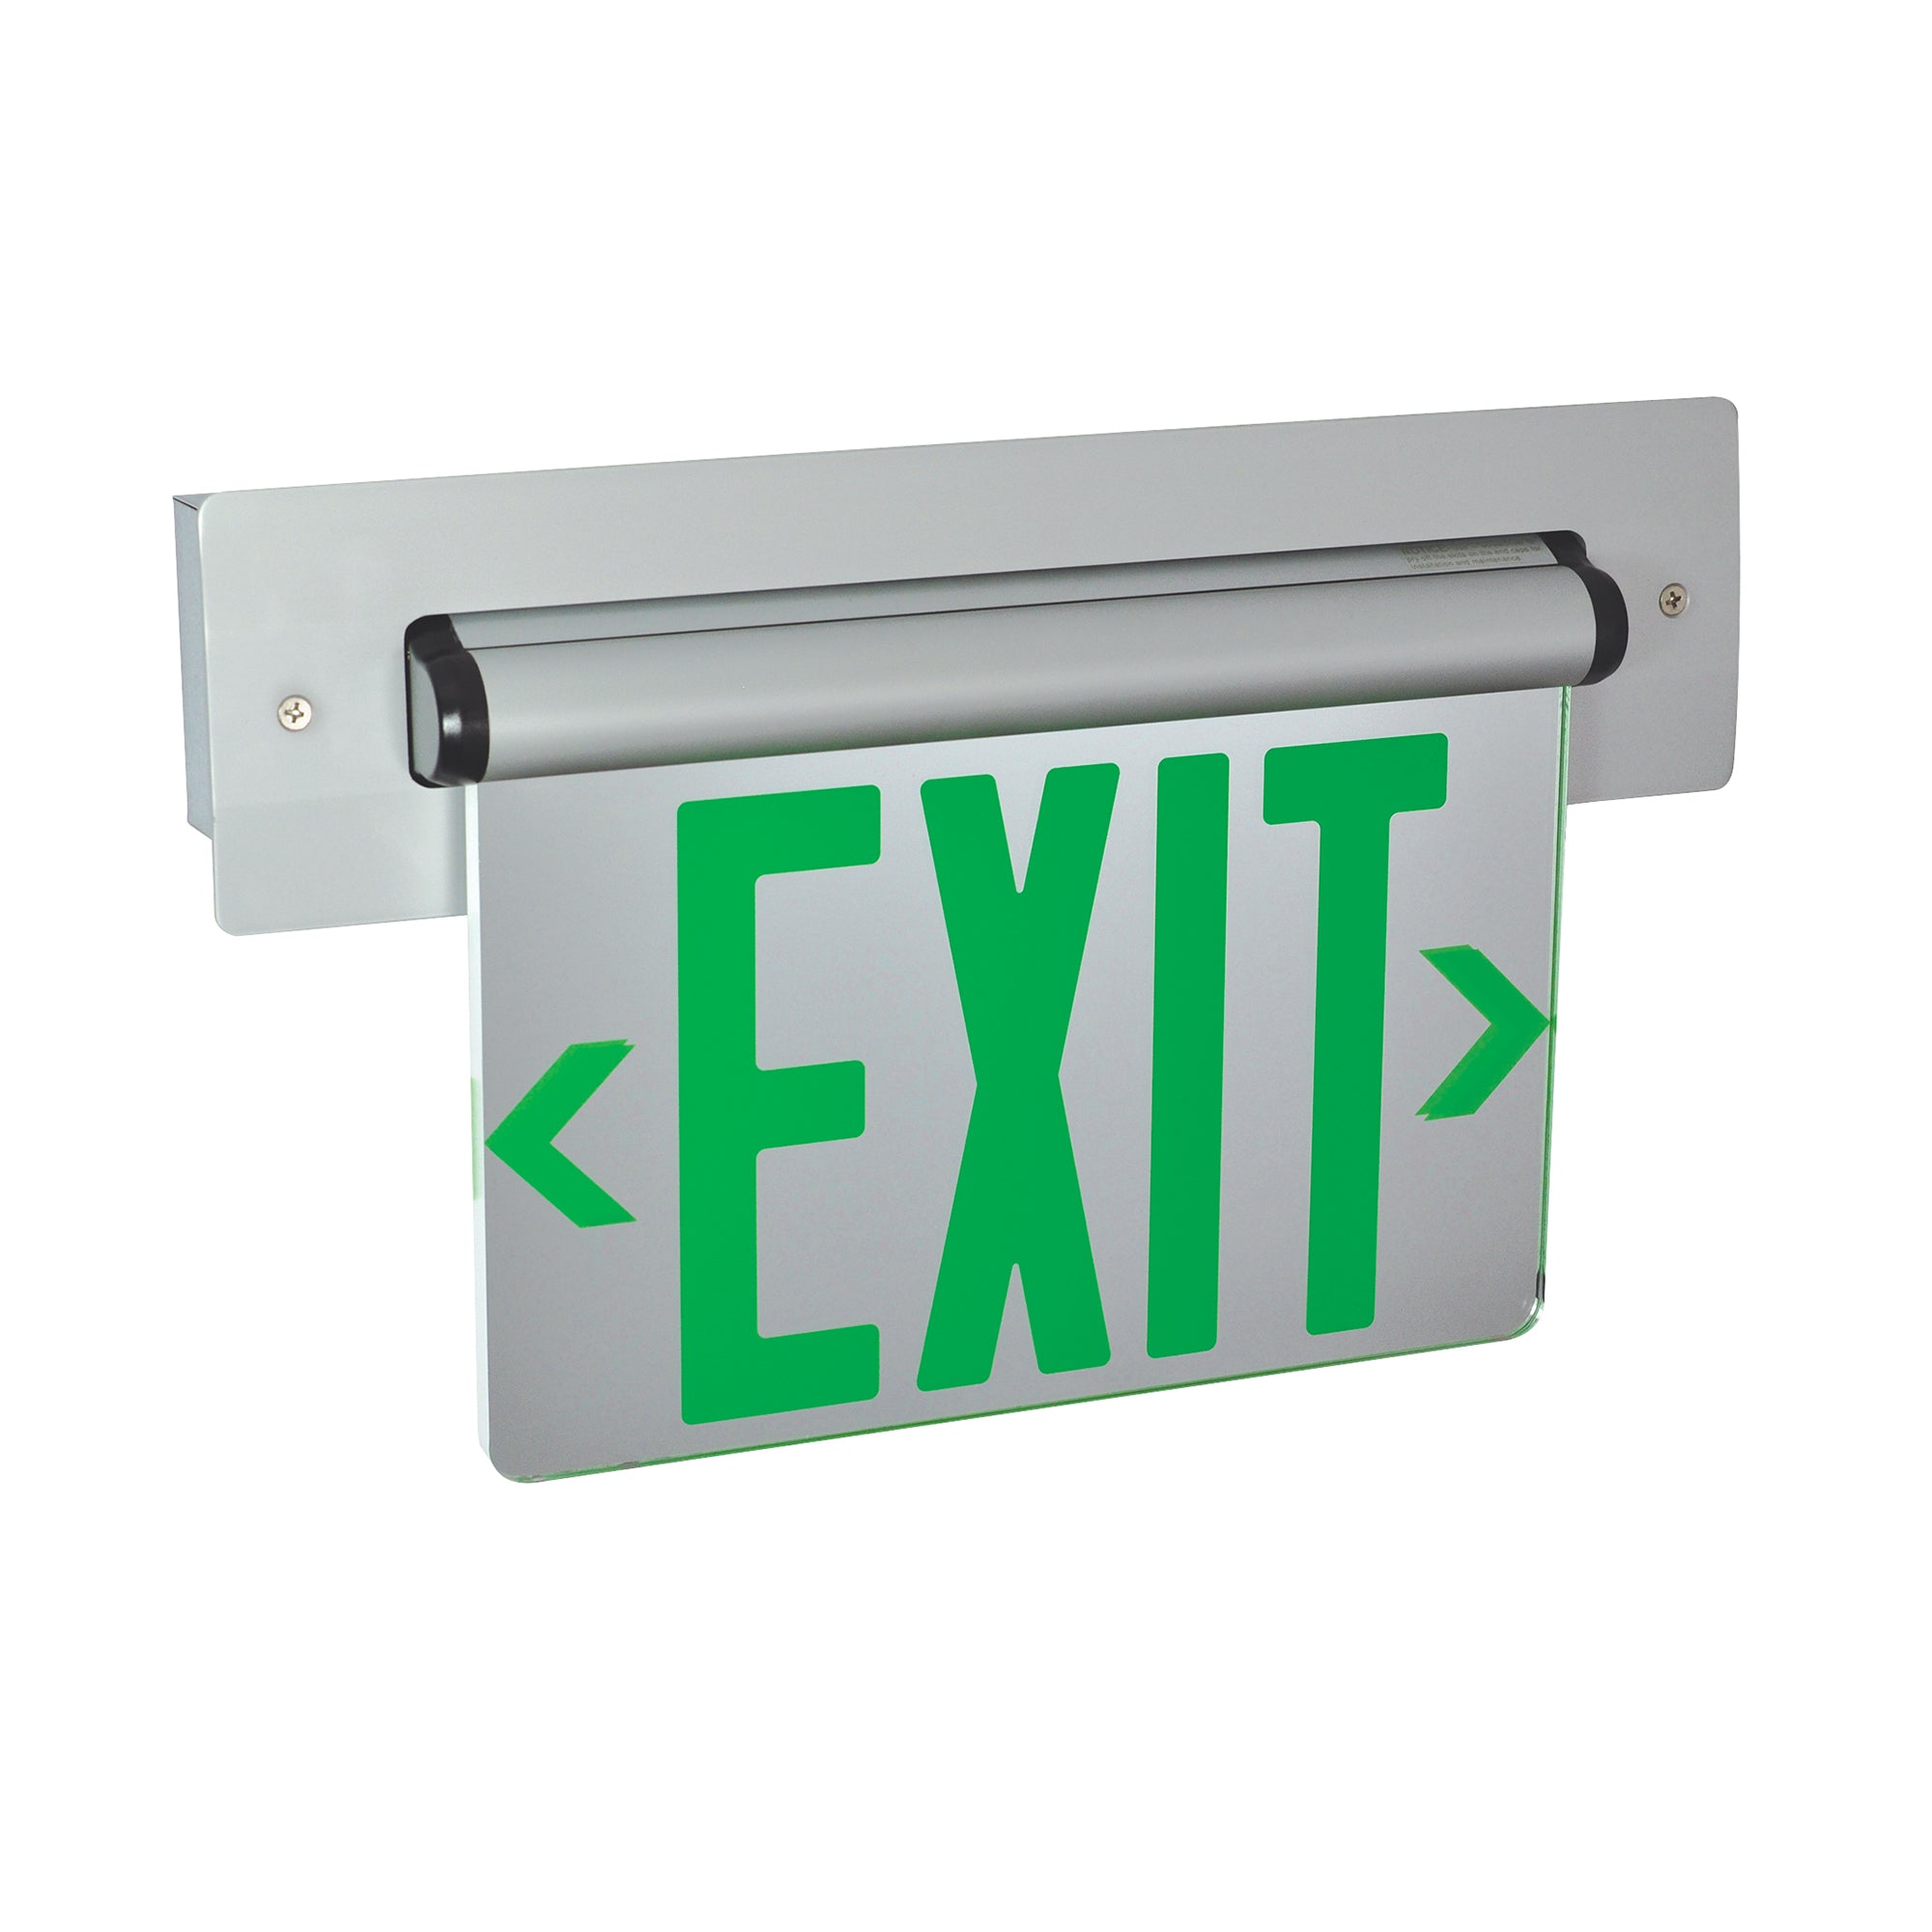 Nora Lighting NX-815-LEDGMW - Exit / Emergency - Recessed Adjustable LED Edge-Lit Exit Sign, Battery Backup, 6 Inch Green Letters, Single Face / Mirrored Acrylic, White Housing